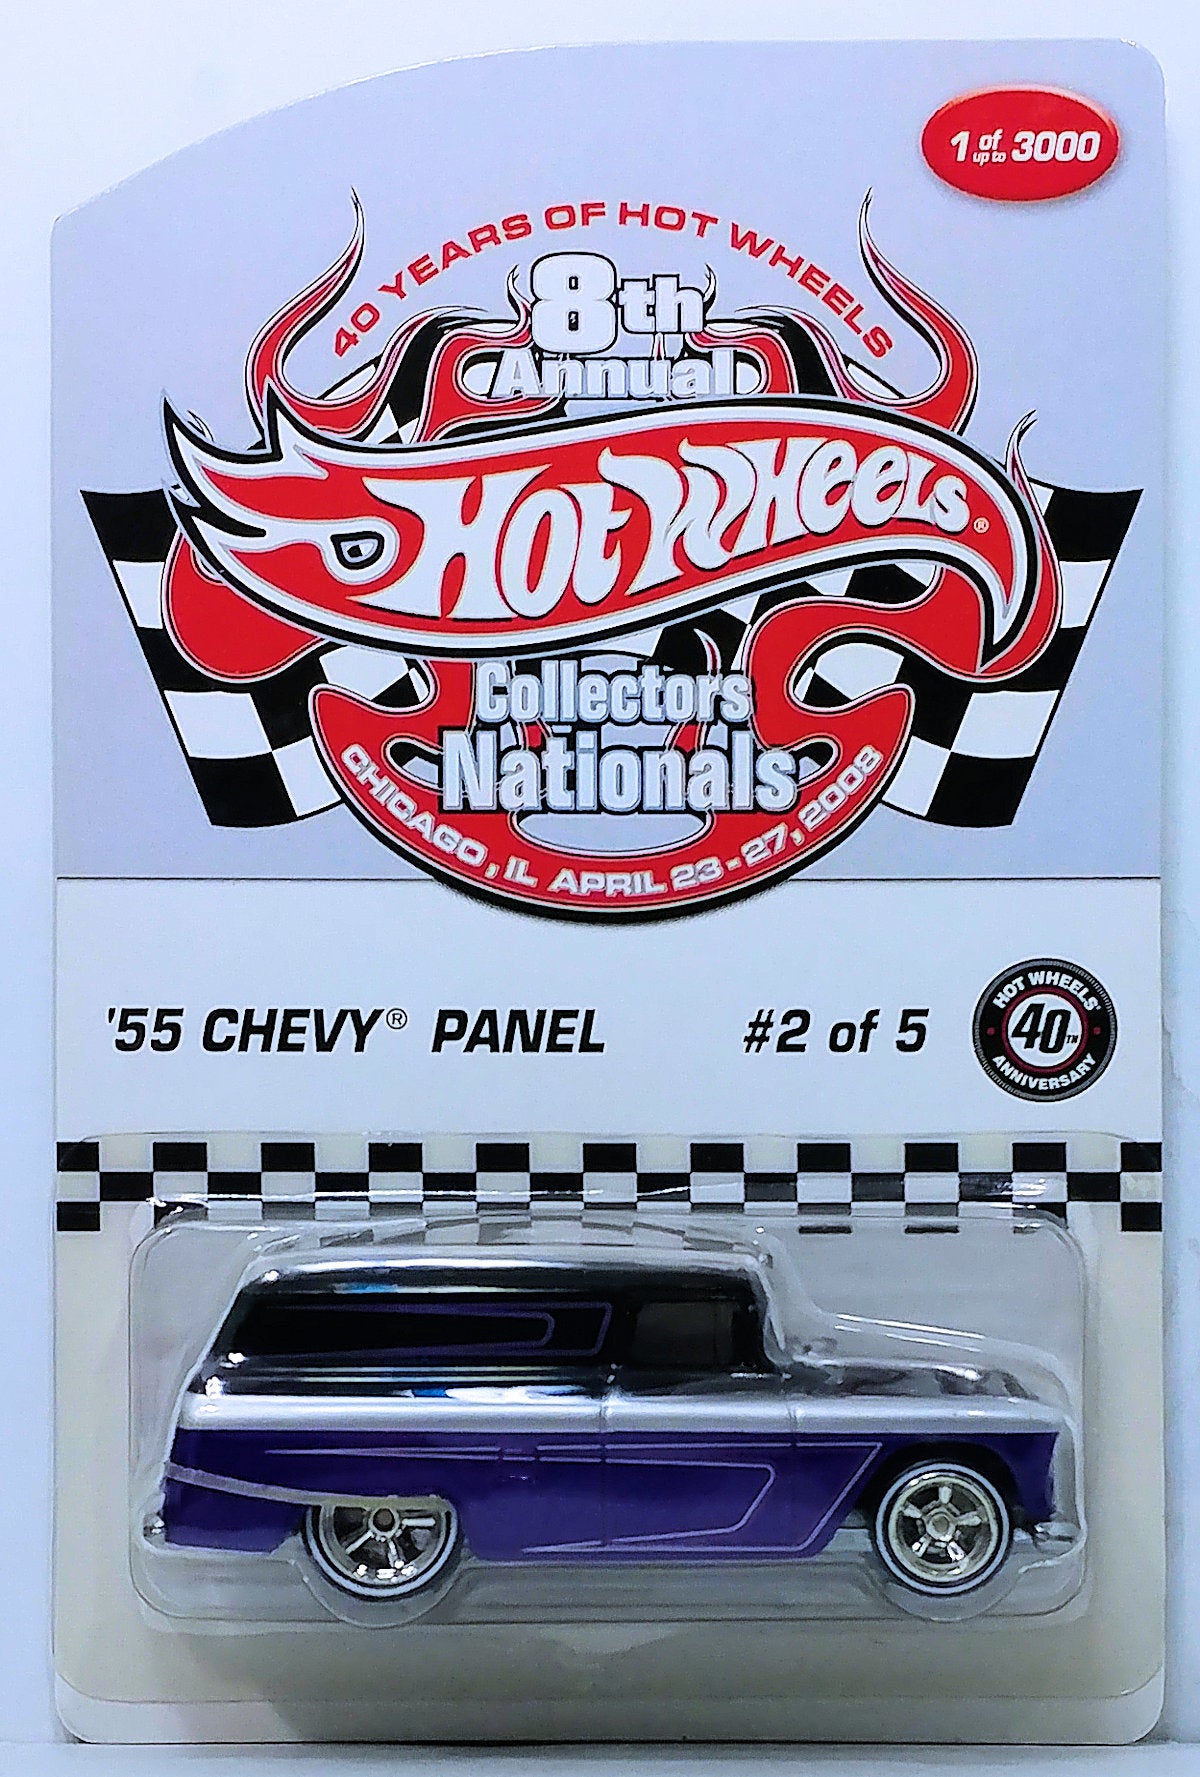 Hot Wheels 2008 - 8th Annual Collectors Nationals 2/5 - '55 Chevy Panel